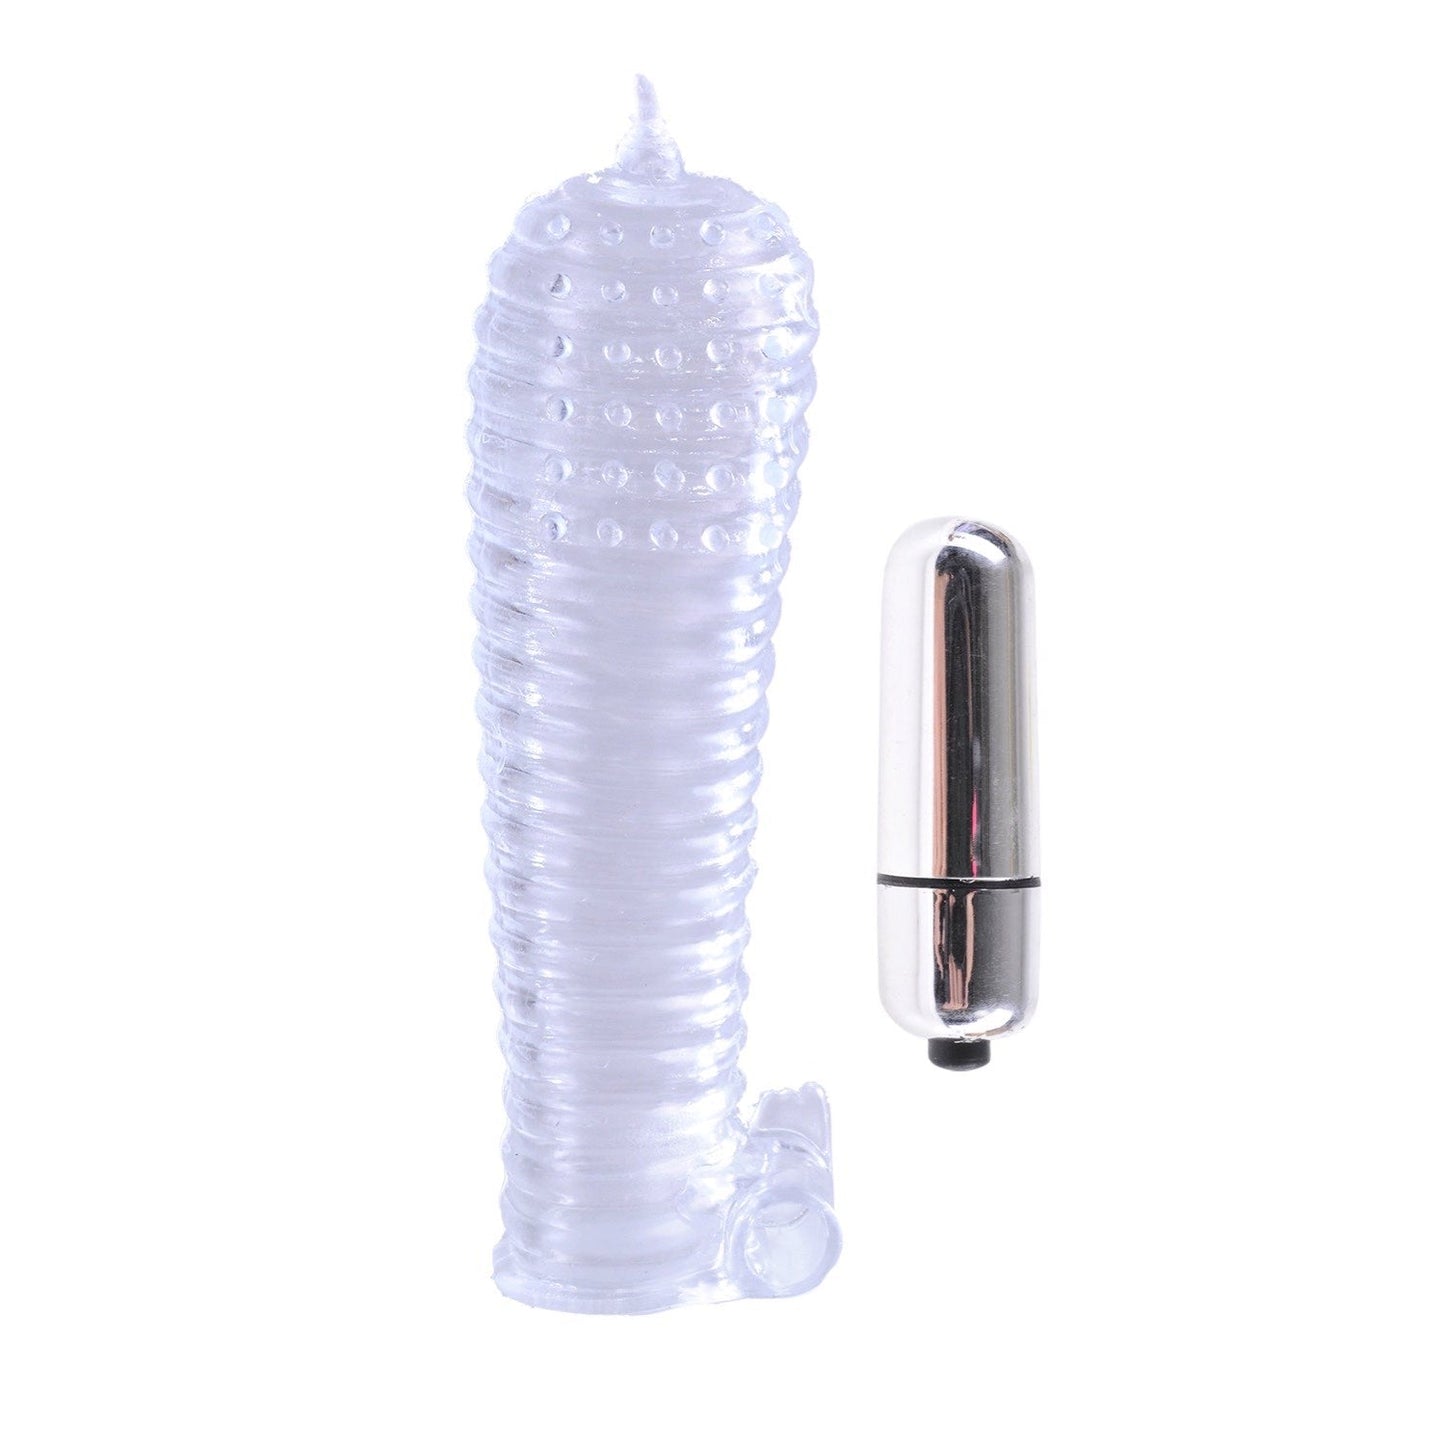 Textured Sleeve & Bullet - Clear Penis Sleeve and Bullet